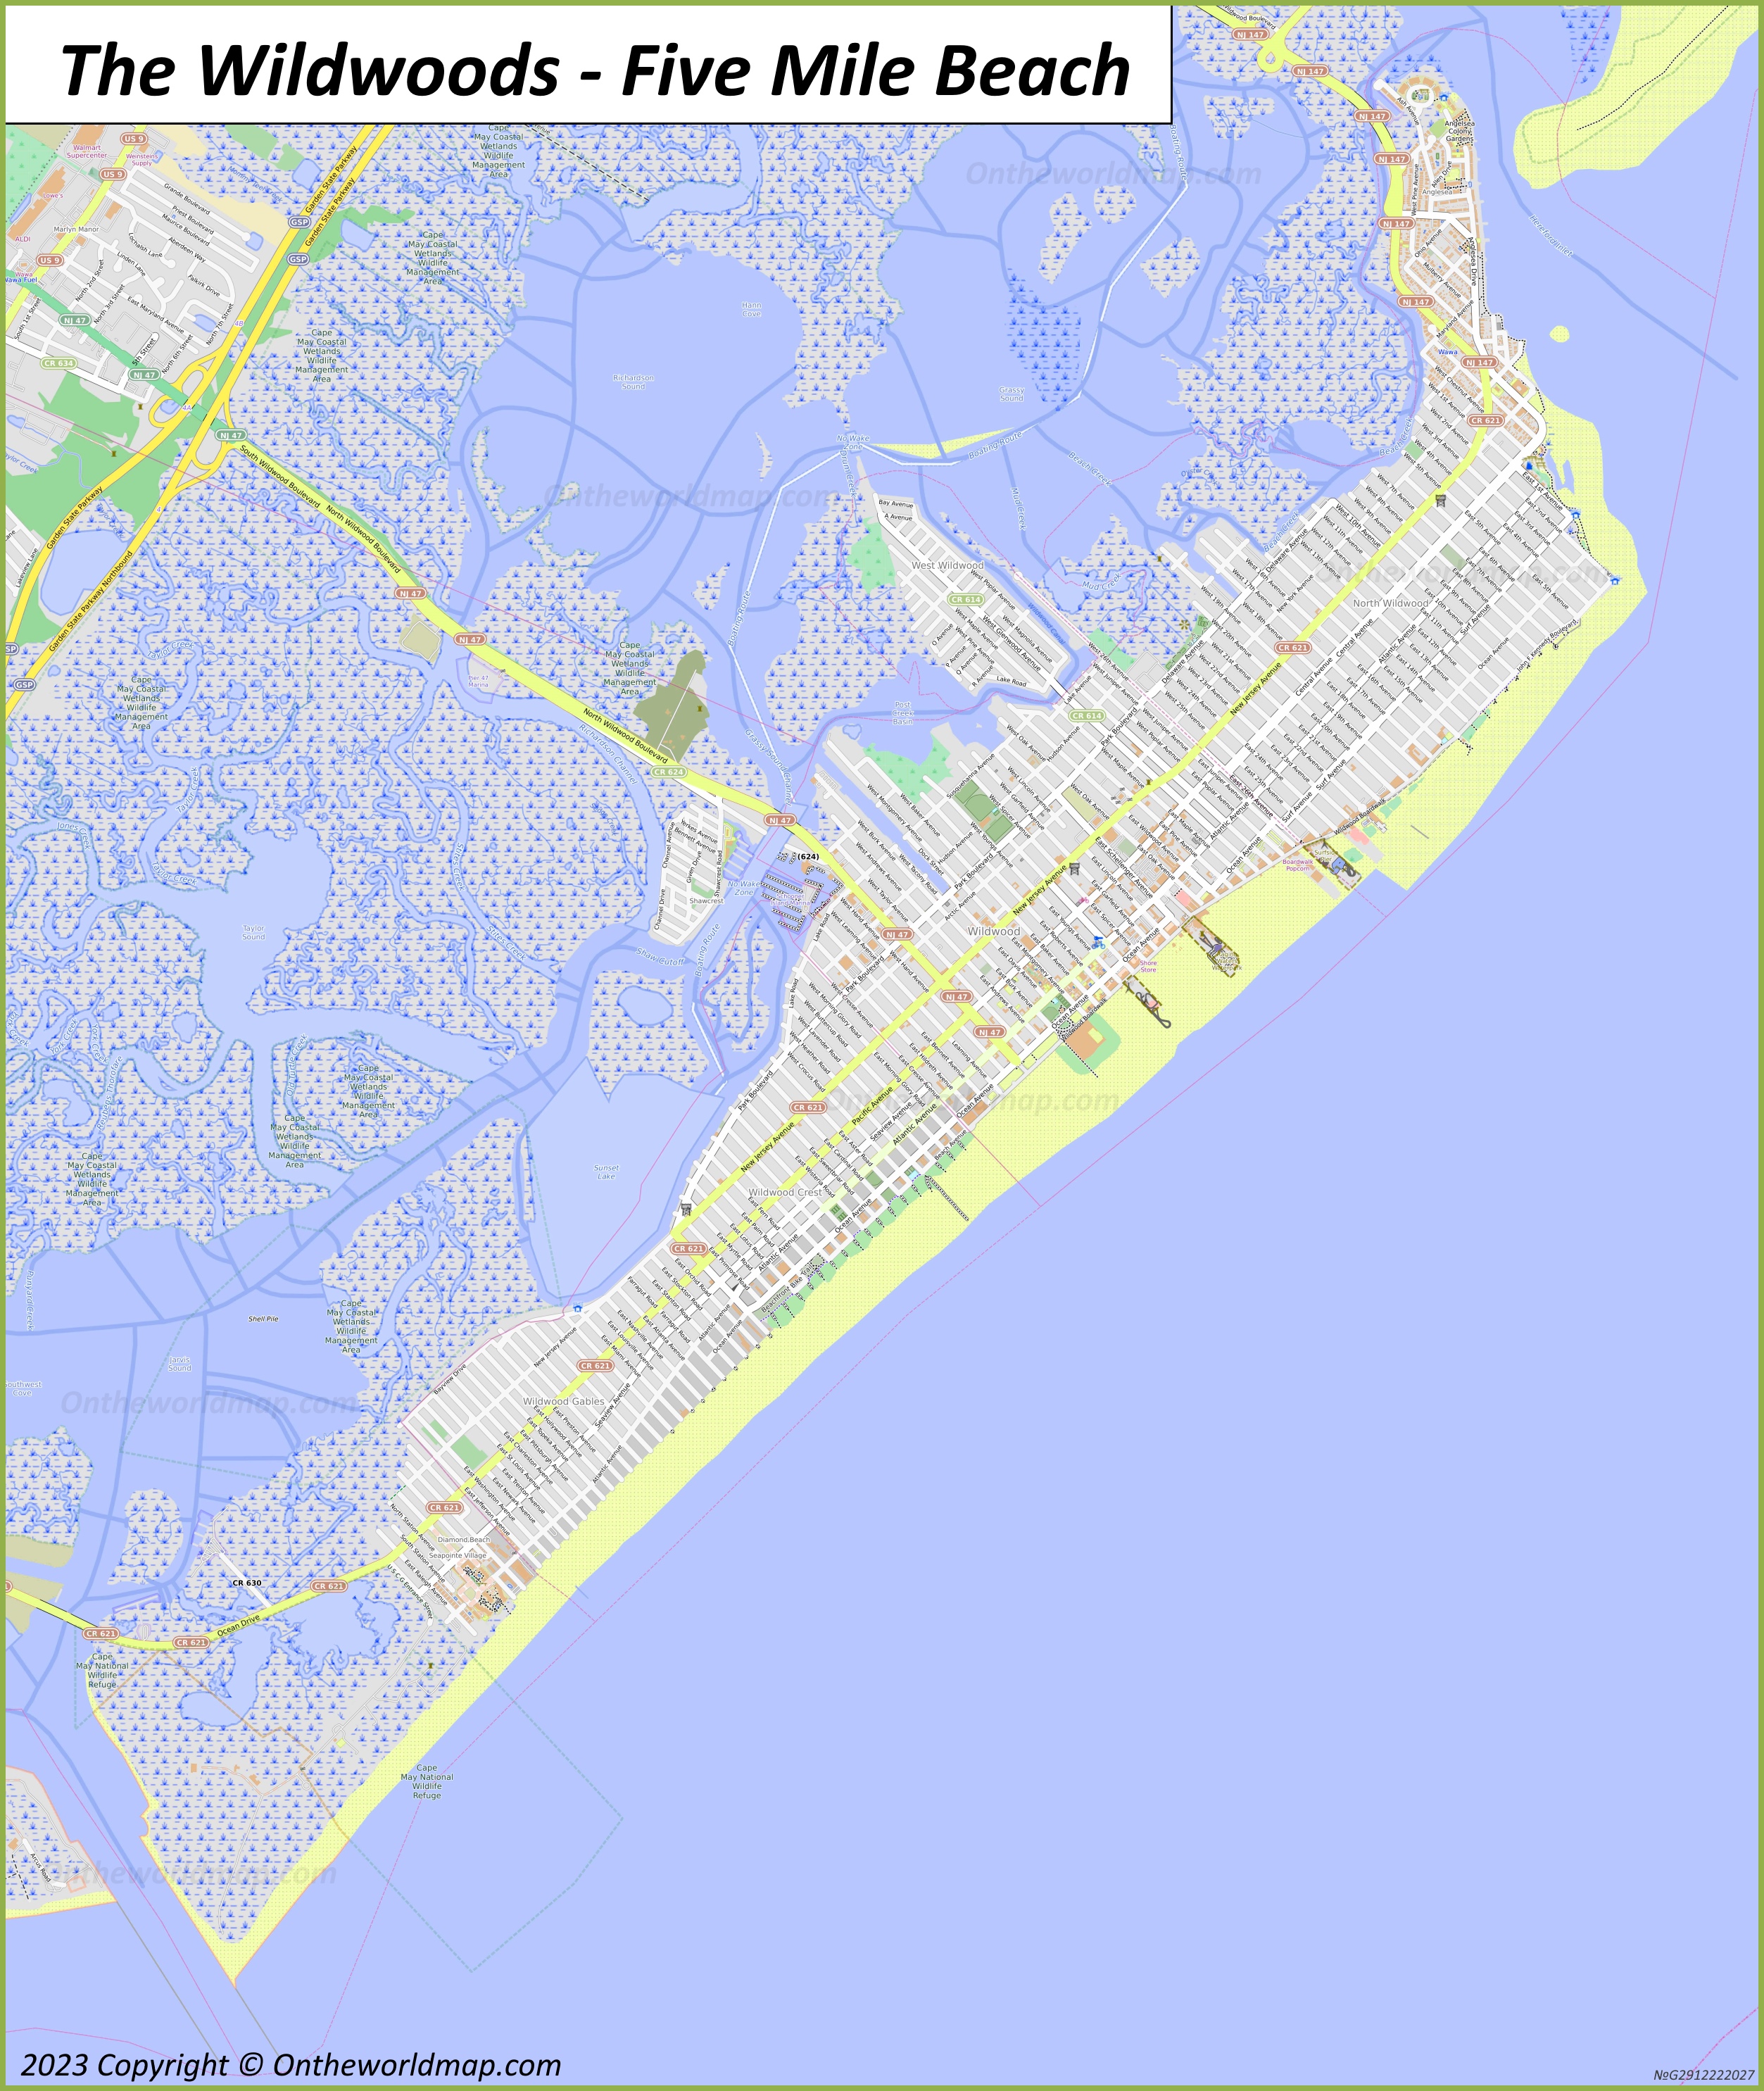 Map of Five Mile Beach - The Wildwoods